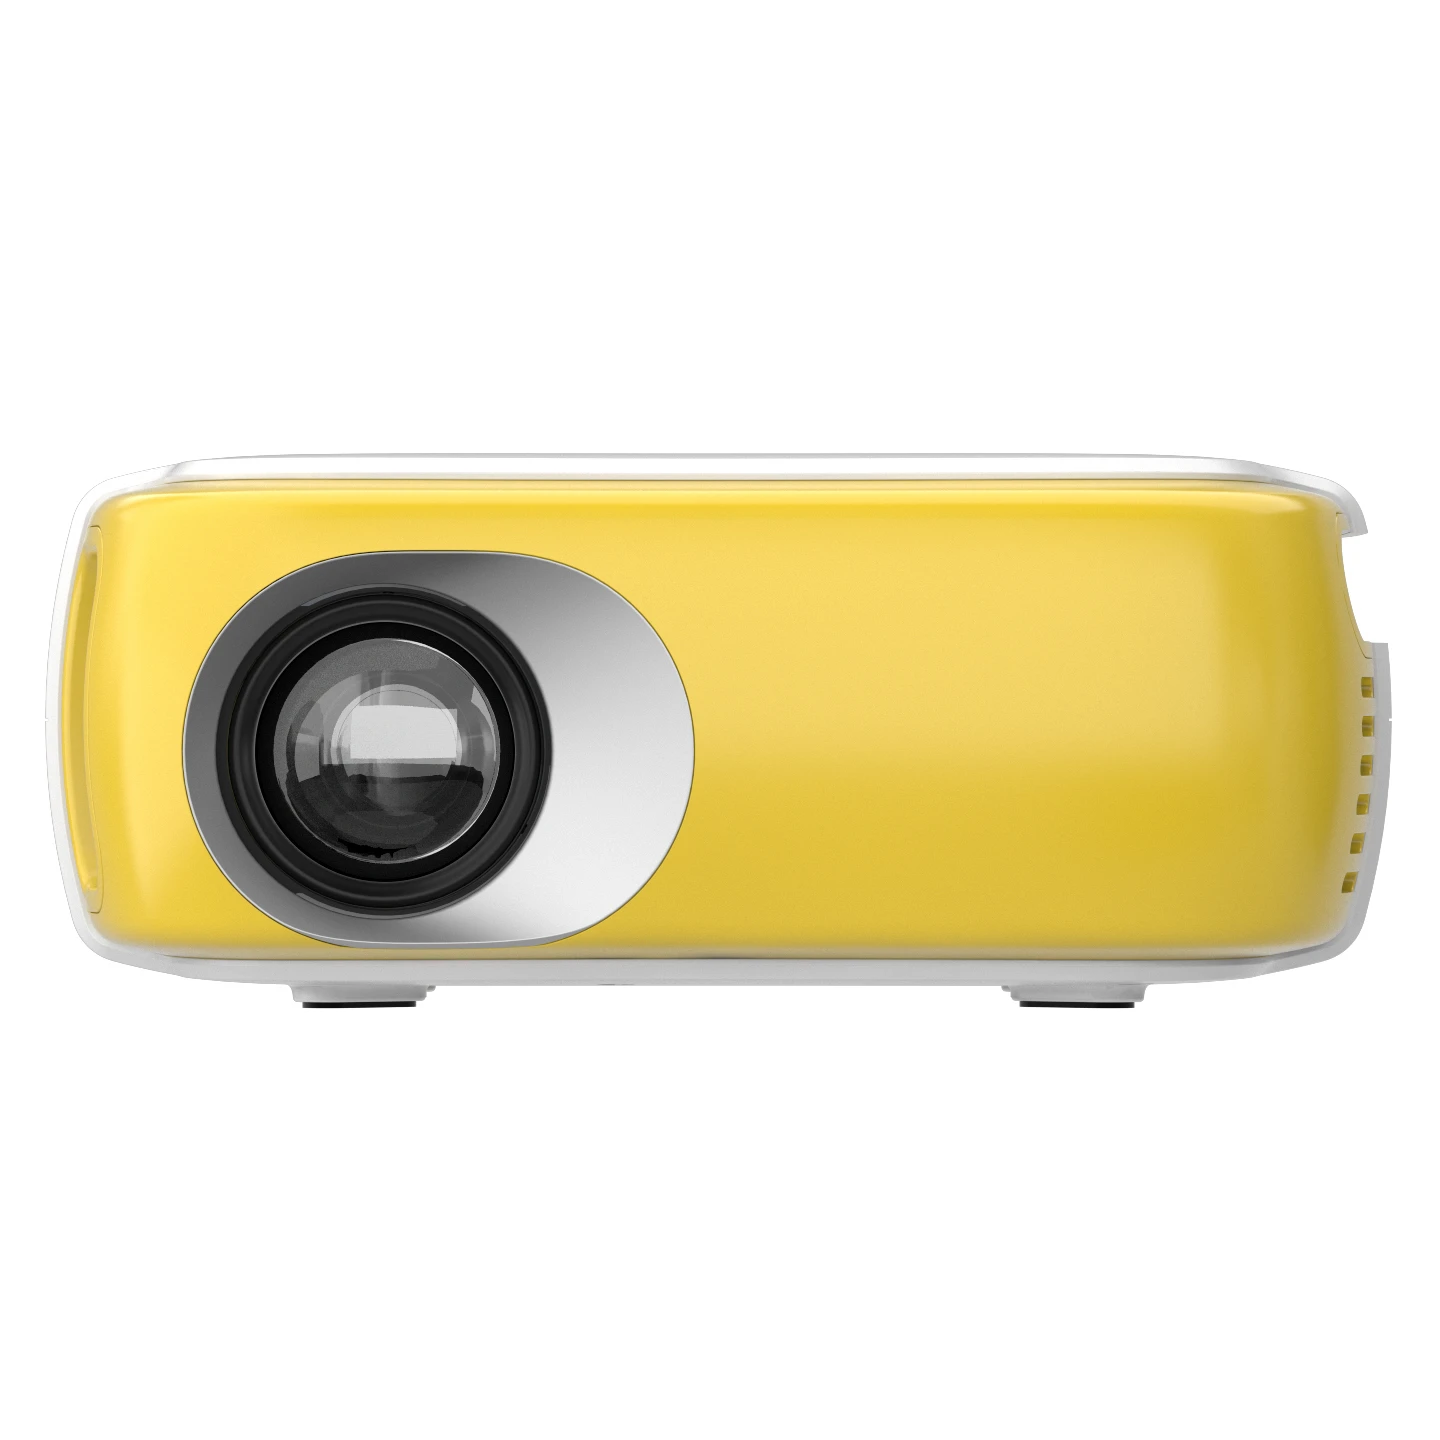 

Home Cinema Beamer Projector Manufacturer Wireless Mobile Smart 1080p Led Mini Projector for Phone Business White Technology TFT, Yellow